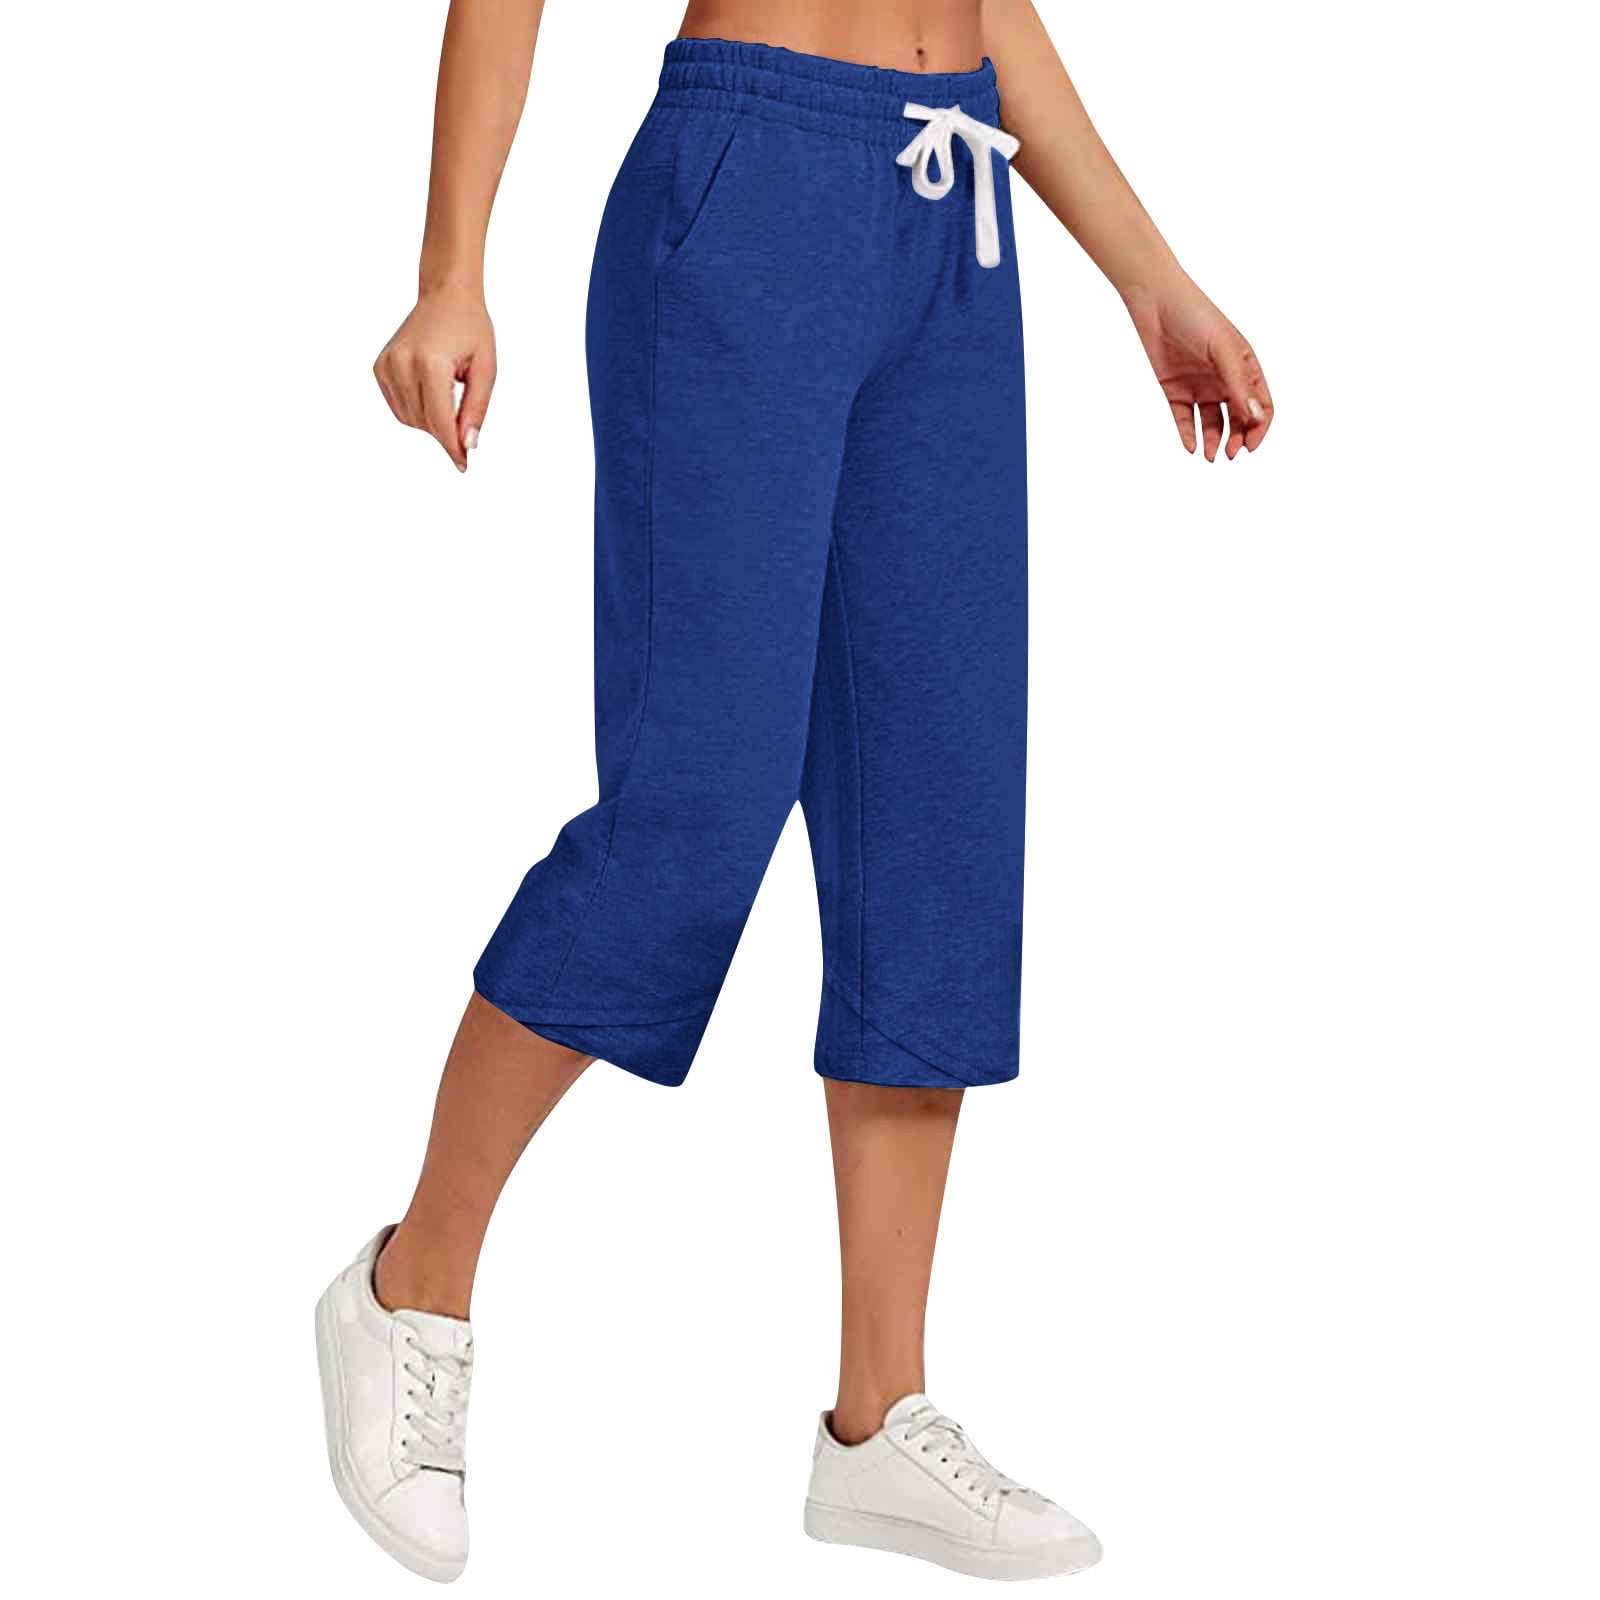 Wycnly Clearance Deals Capris for Women Capri Pants for Women Casual ...